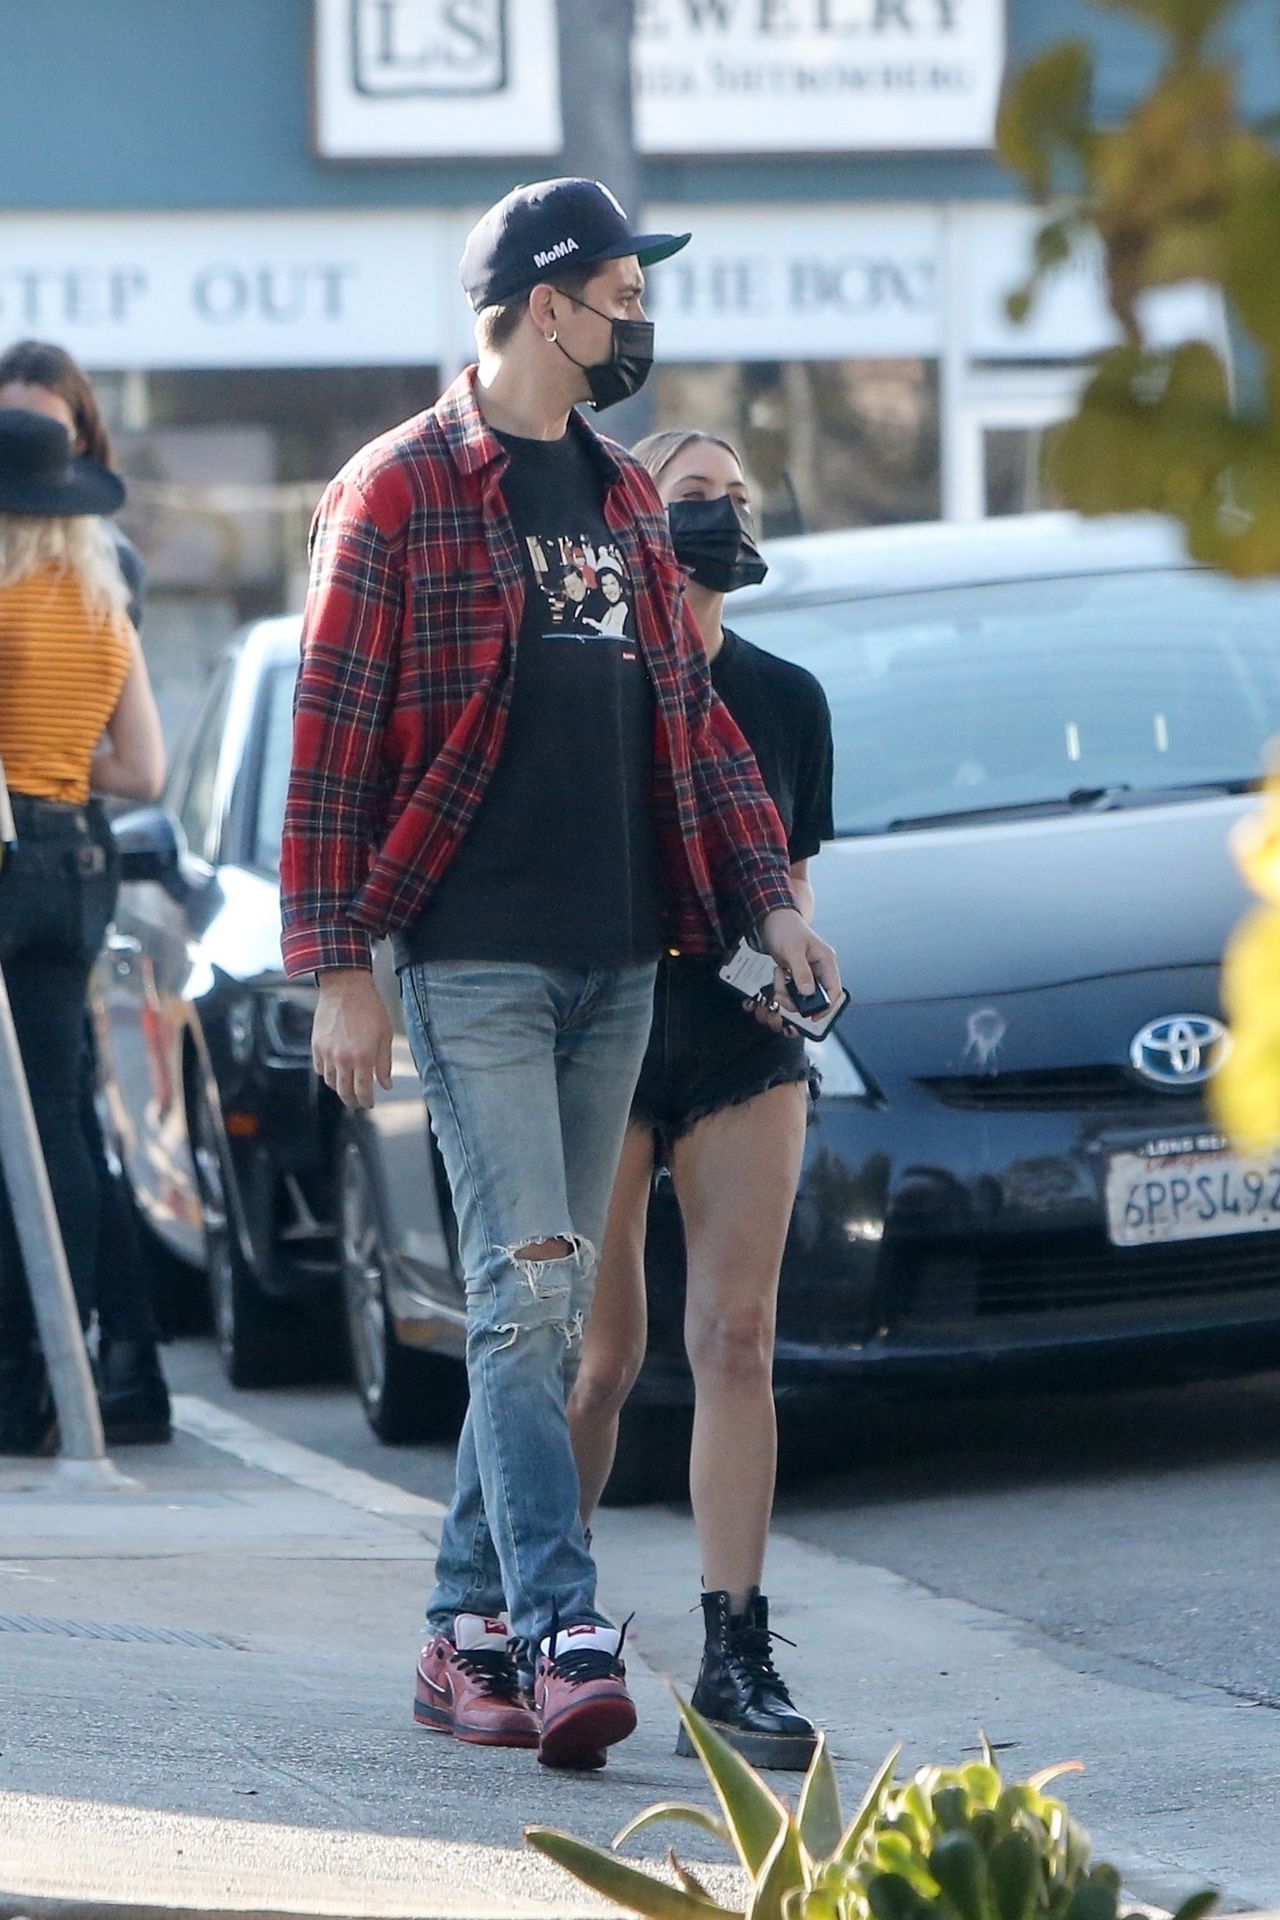 Ashley Benson & G-Eazy Have Lunch with a Frien
d in LA (62 Photos)